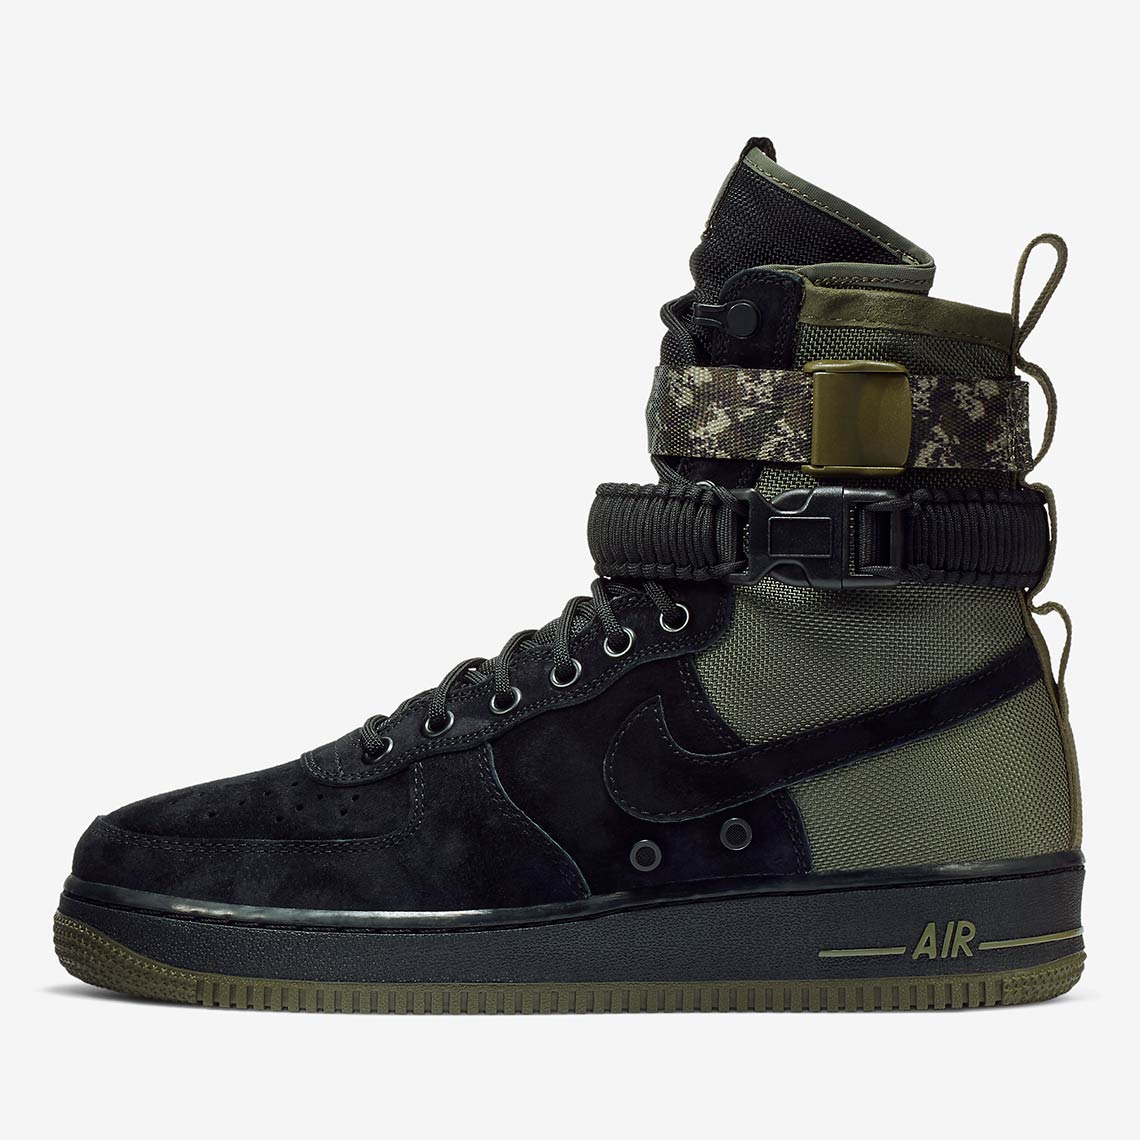 Nike SF-AF1 High Camo Available Now 